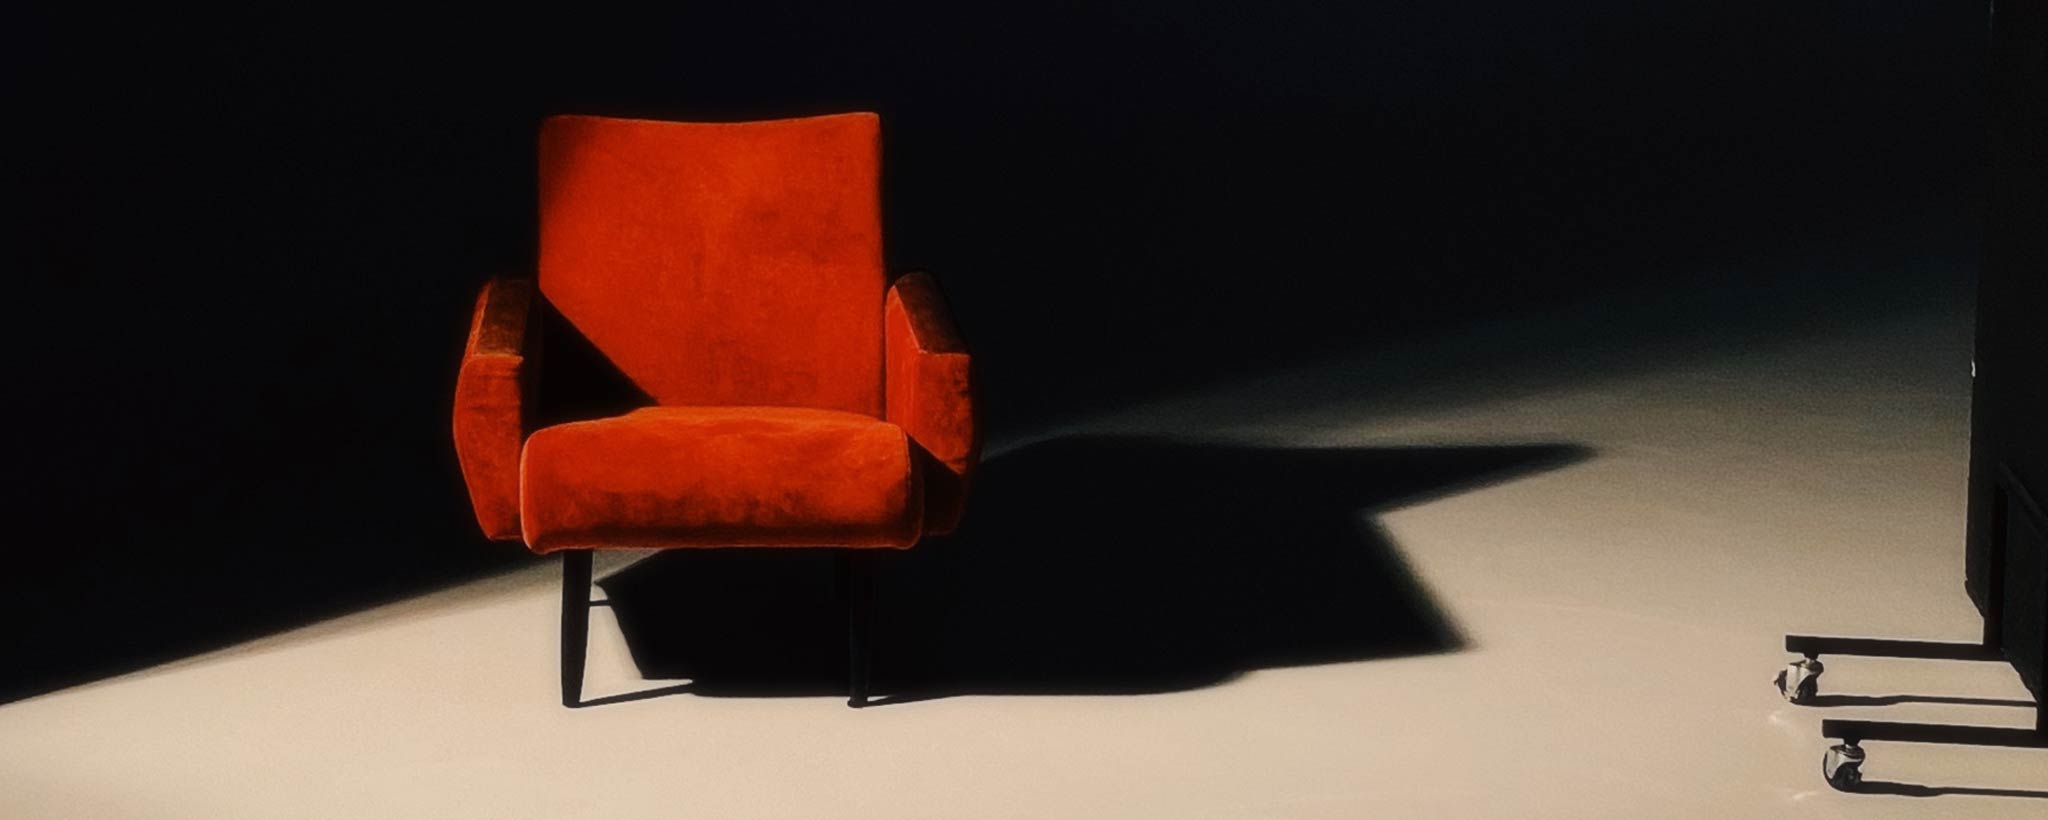 'Red chair in dark room'